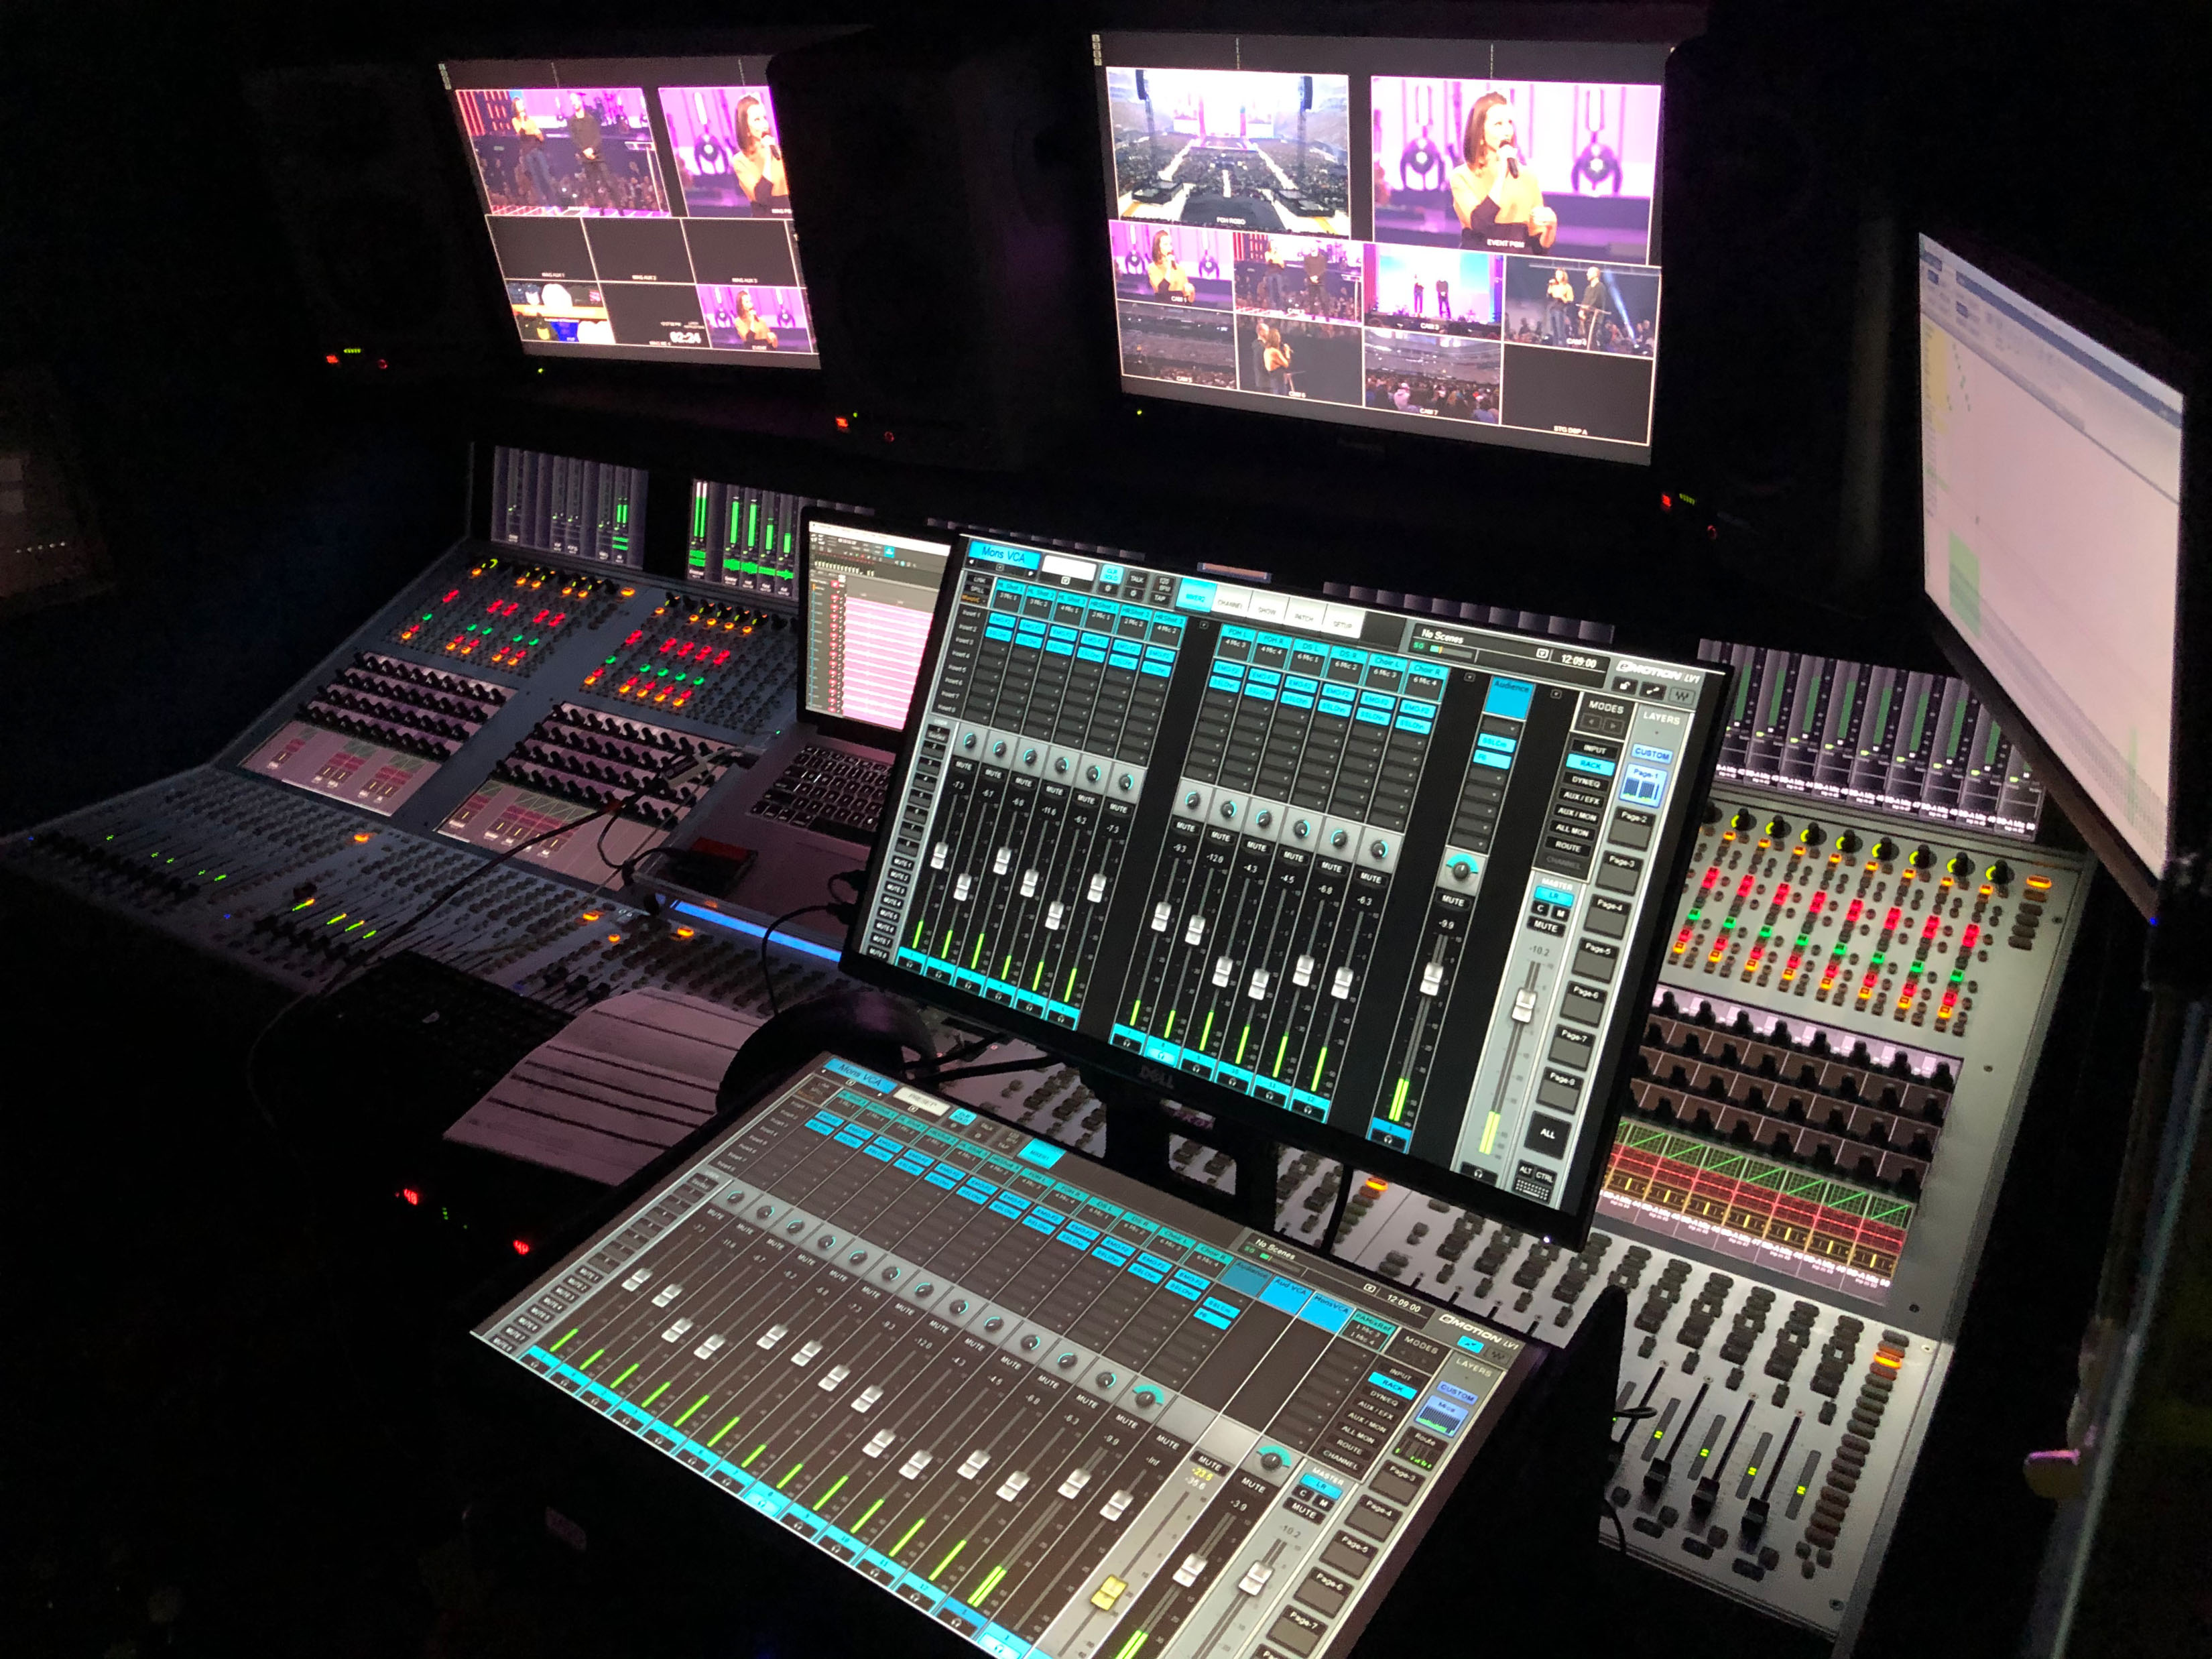 Waves eMotion LV1 Hire Package, HD Production